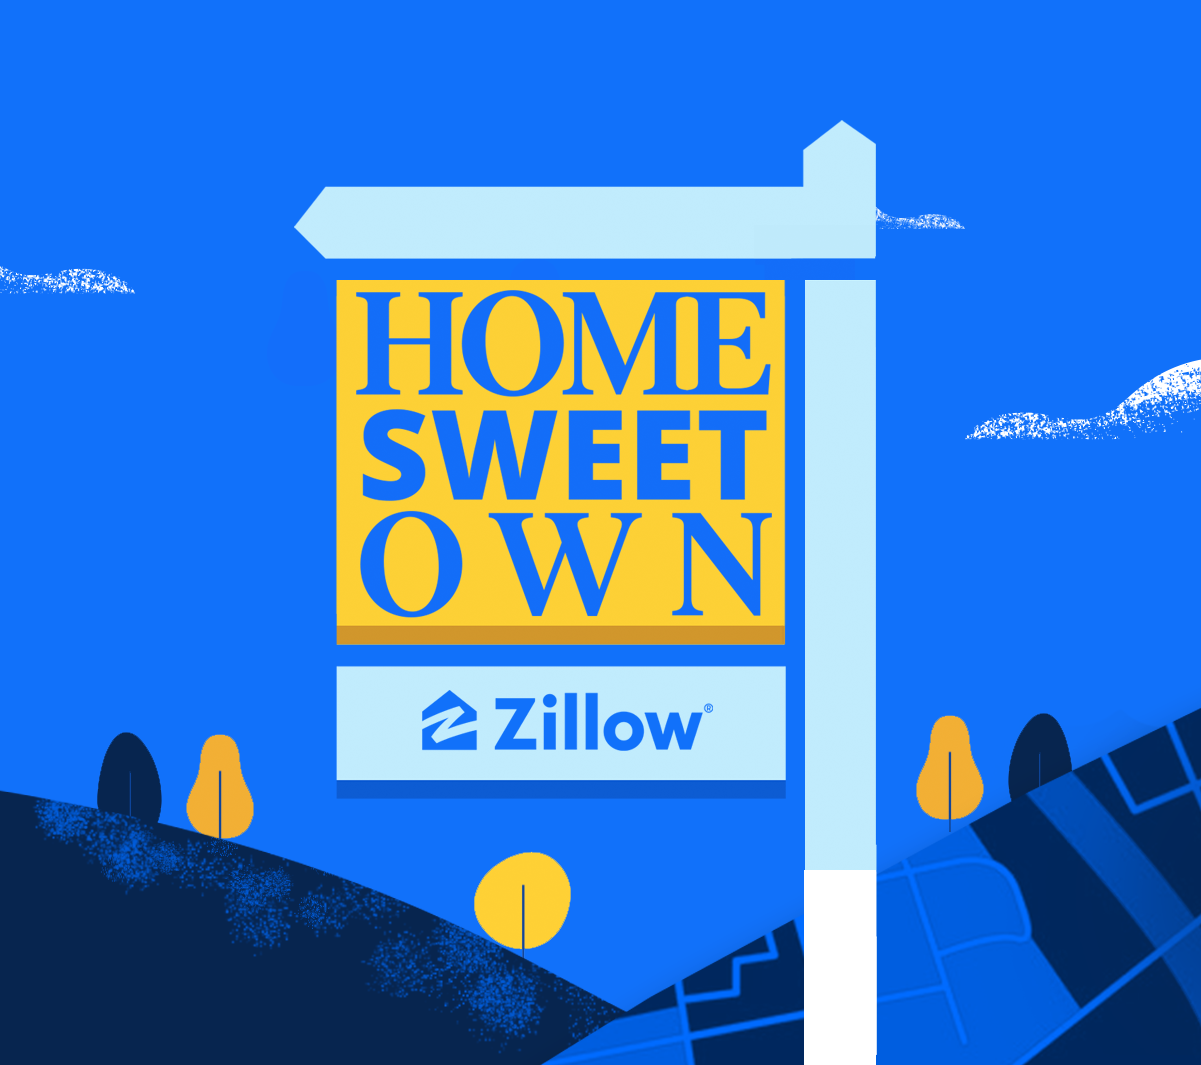 Home Sweet Own  |  Zillow